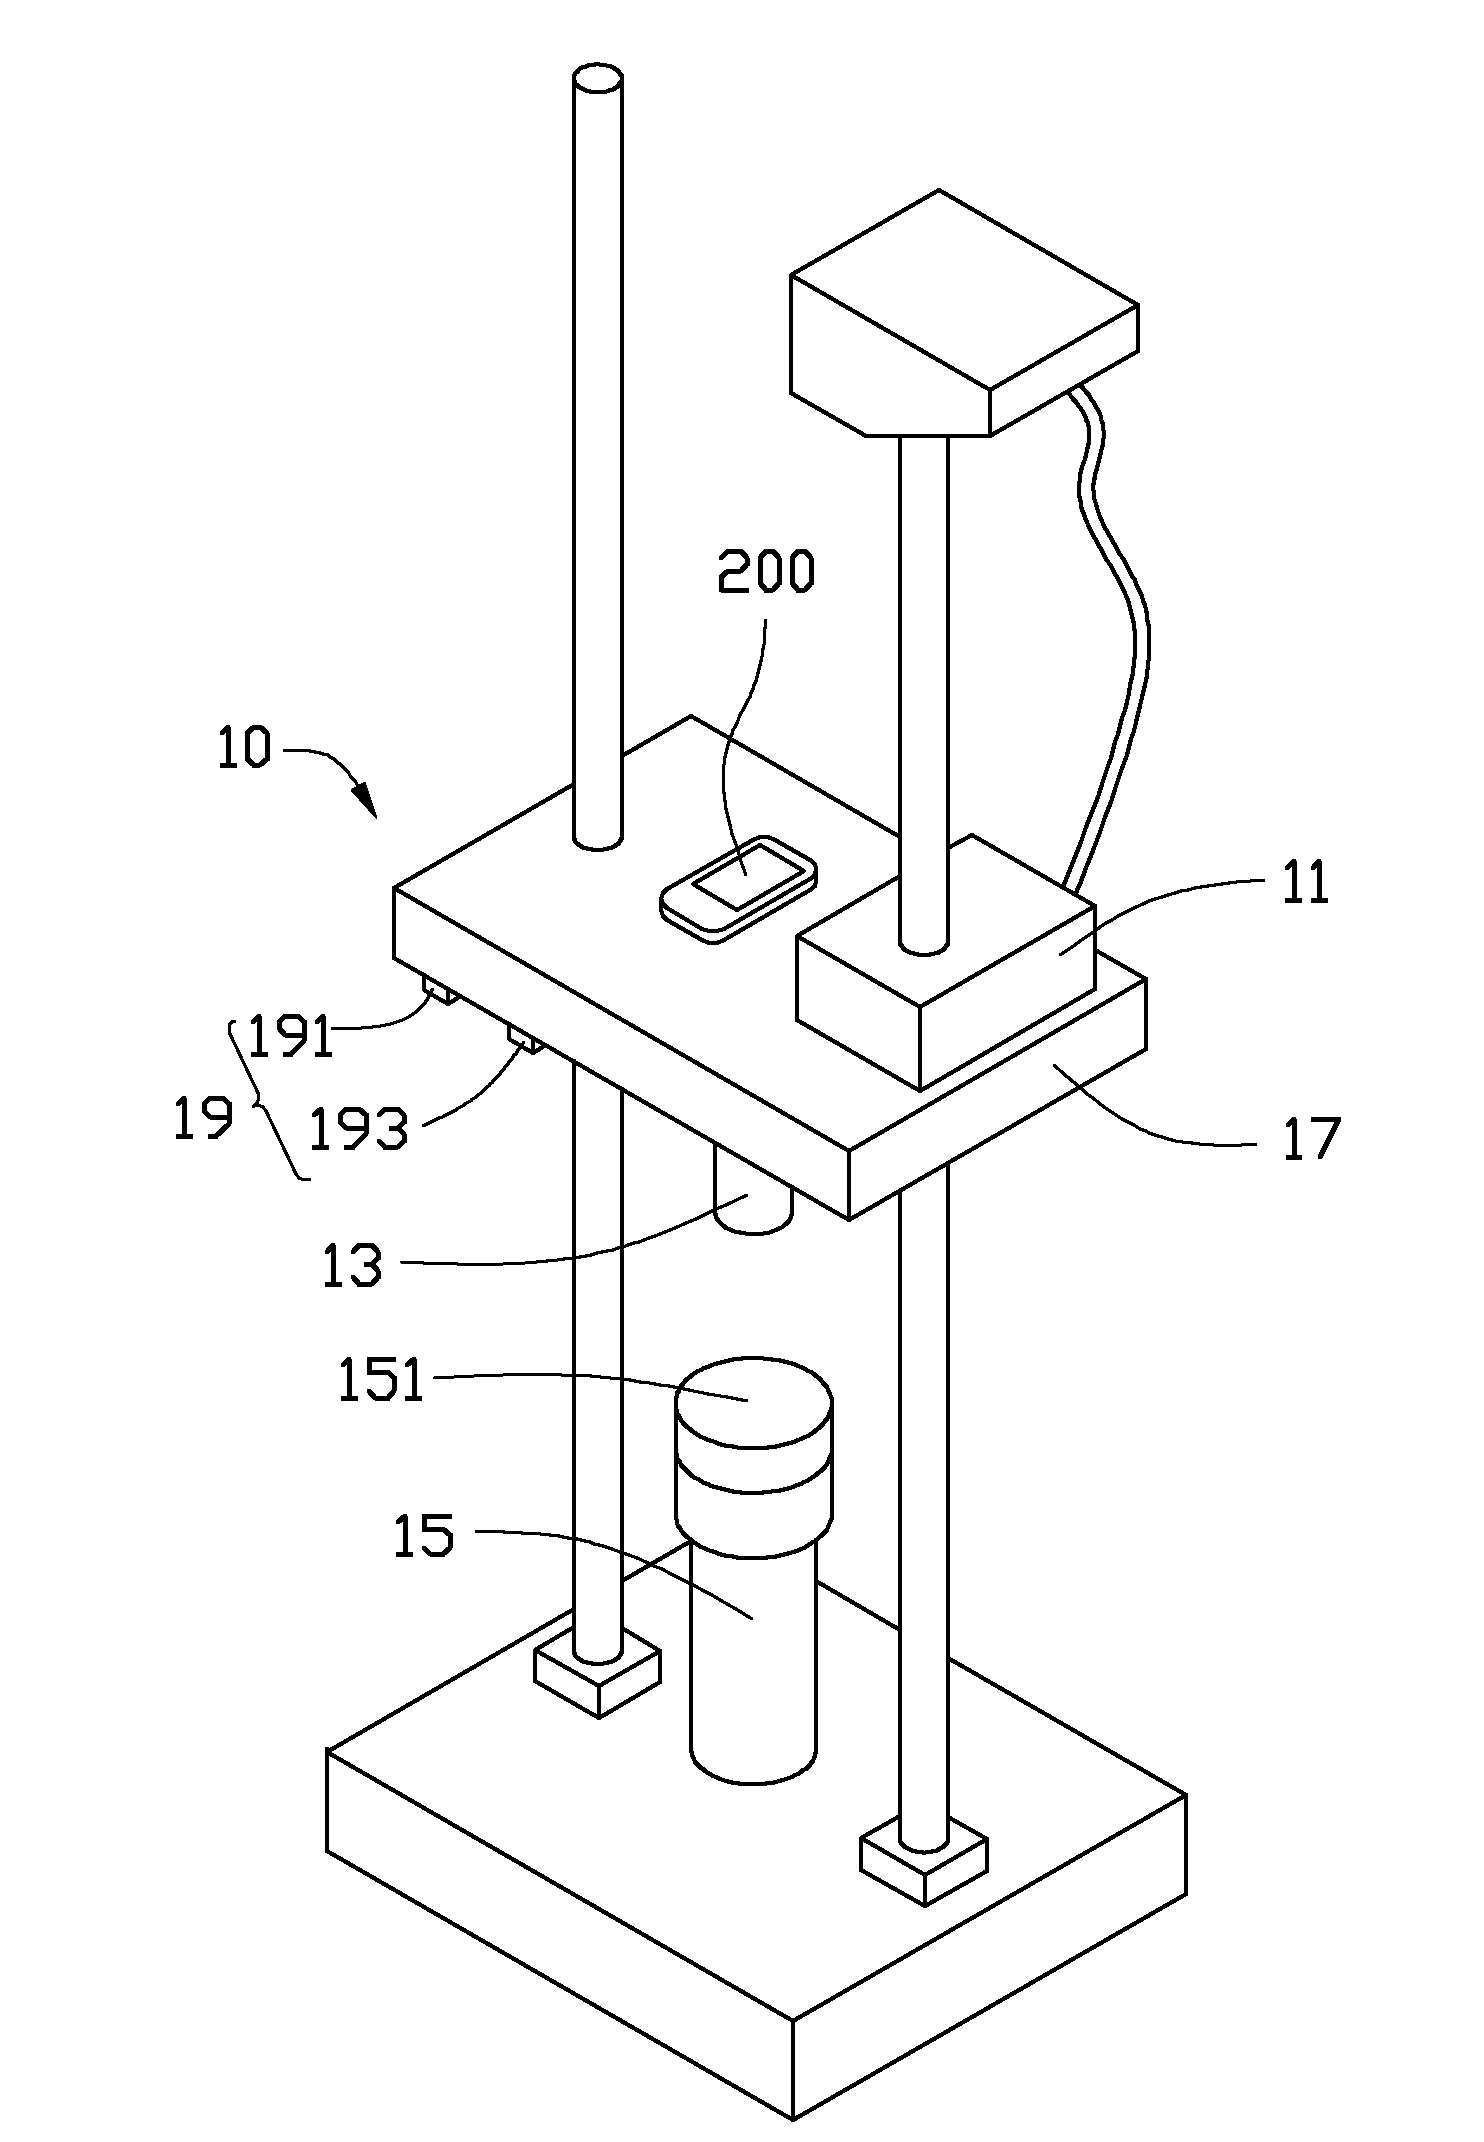 Shock and impact testing device and method